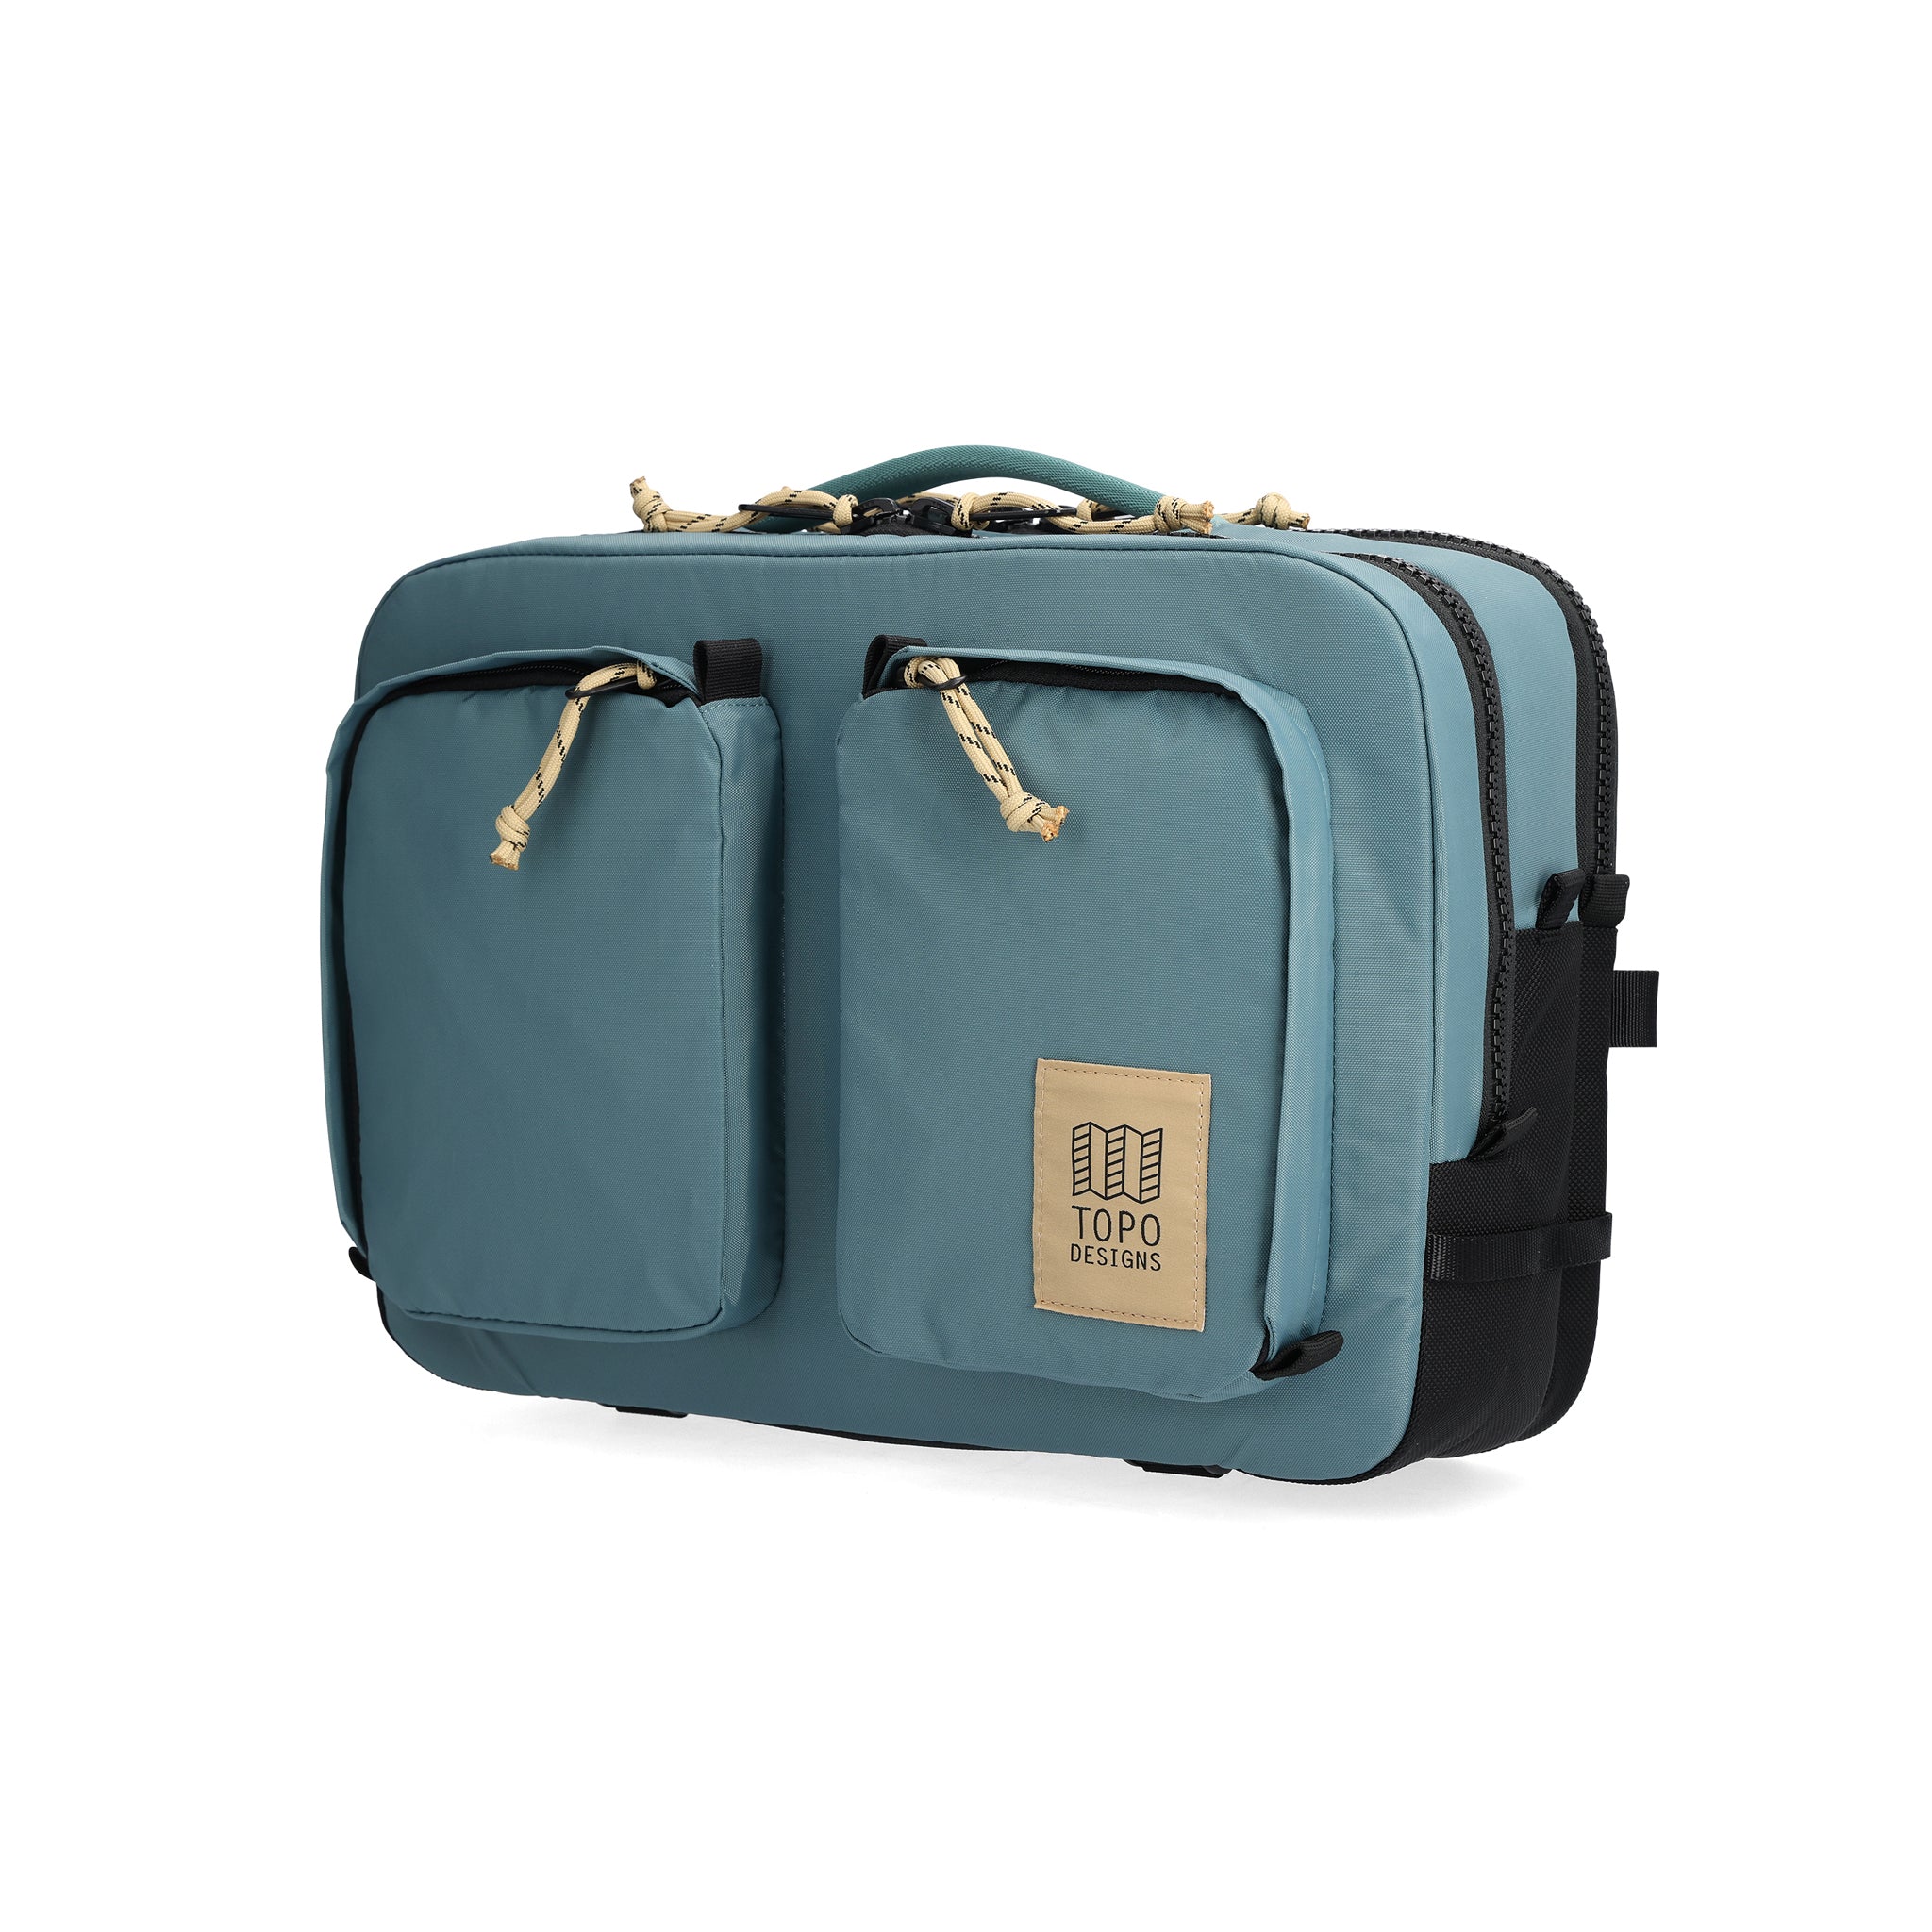 Front View of Topo Designs Global Briefcase  in "Sea Pine"